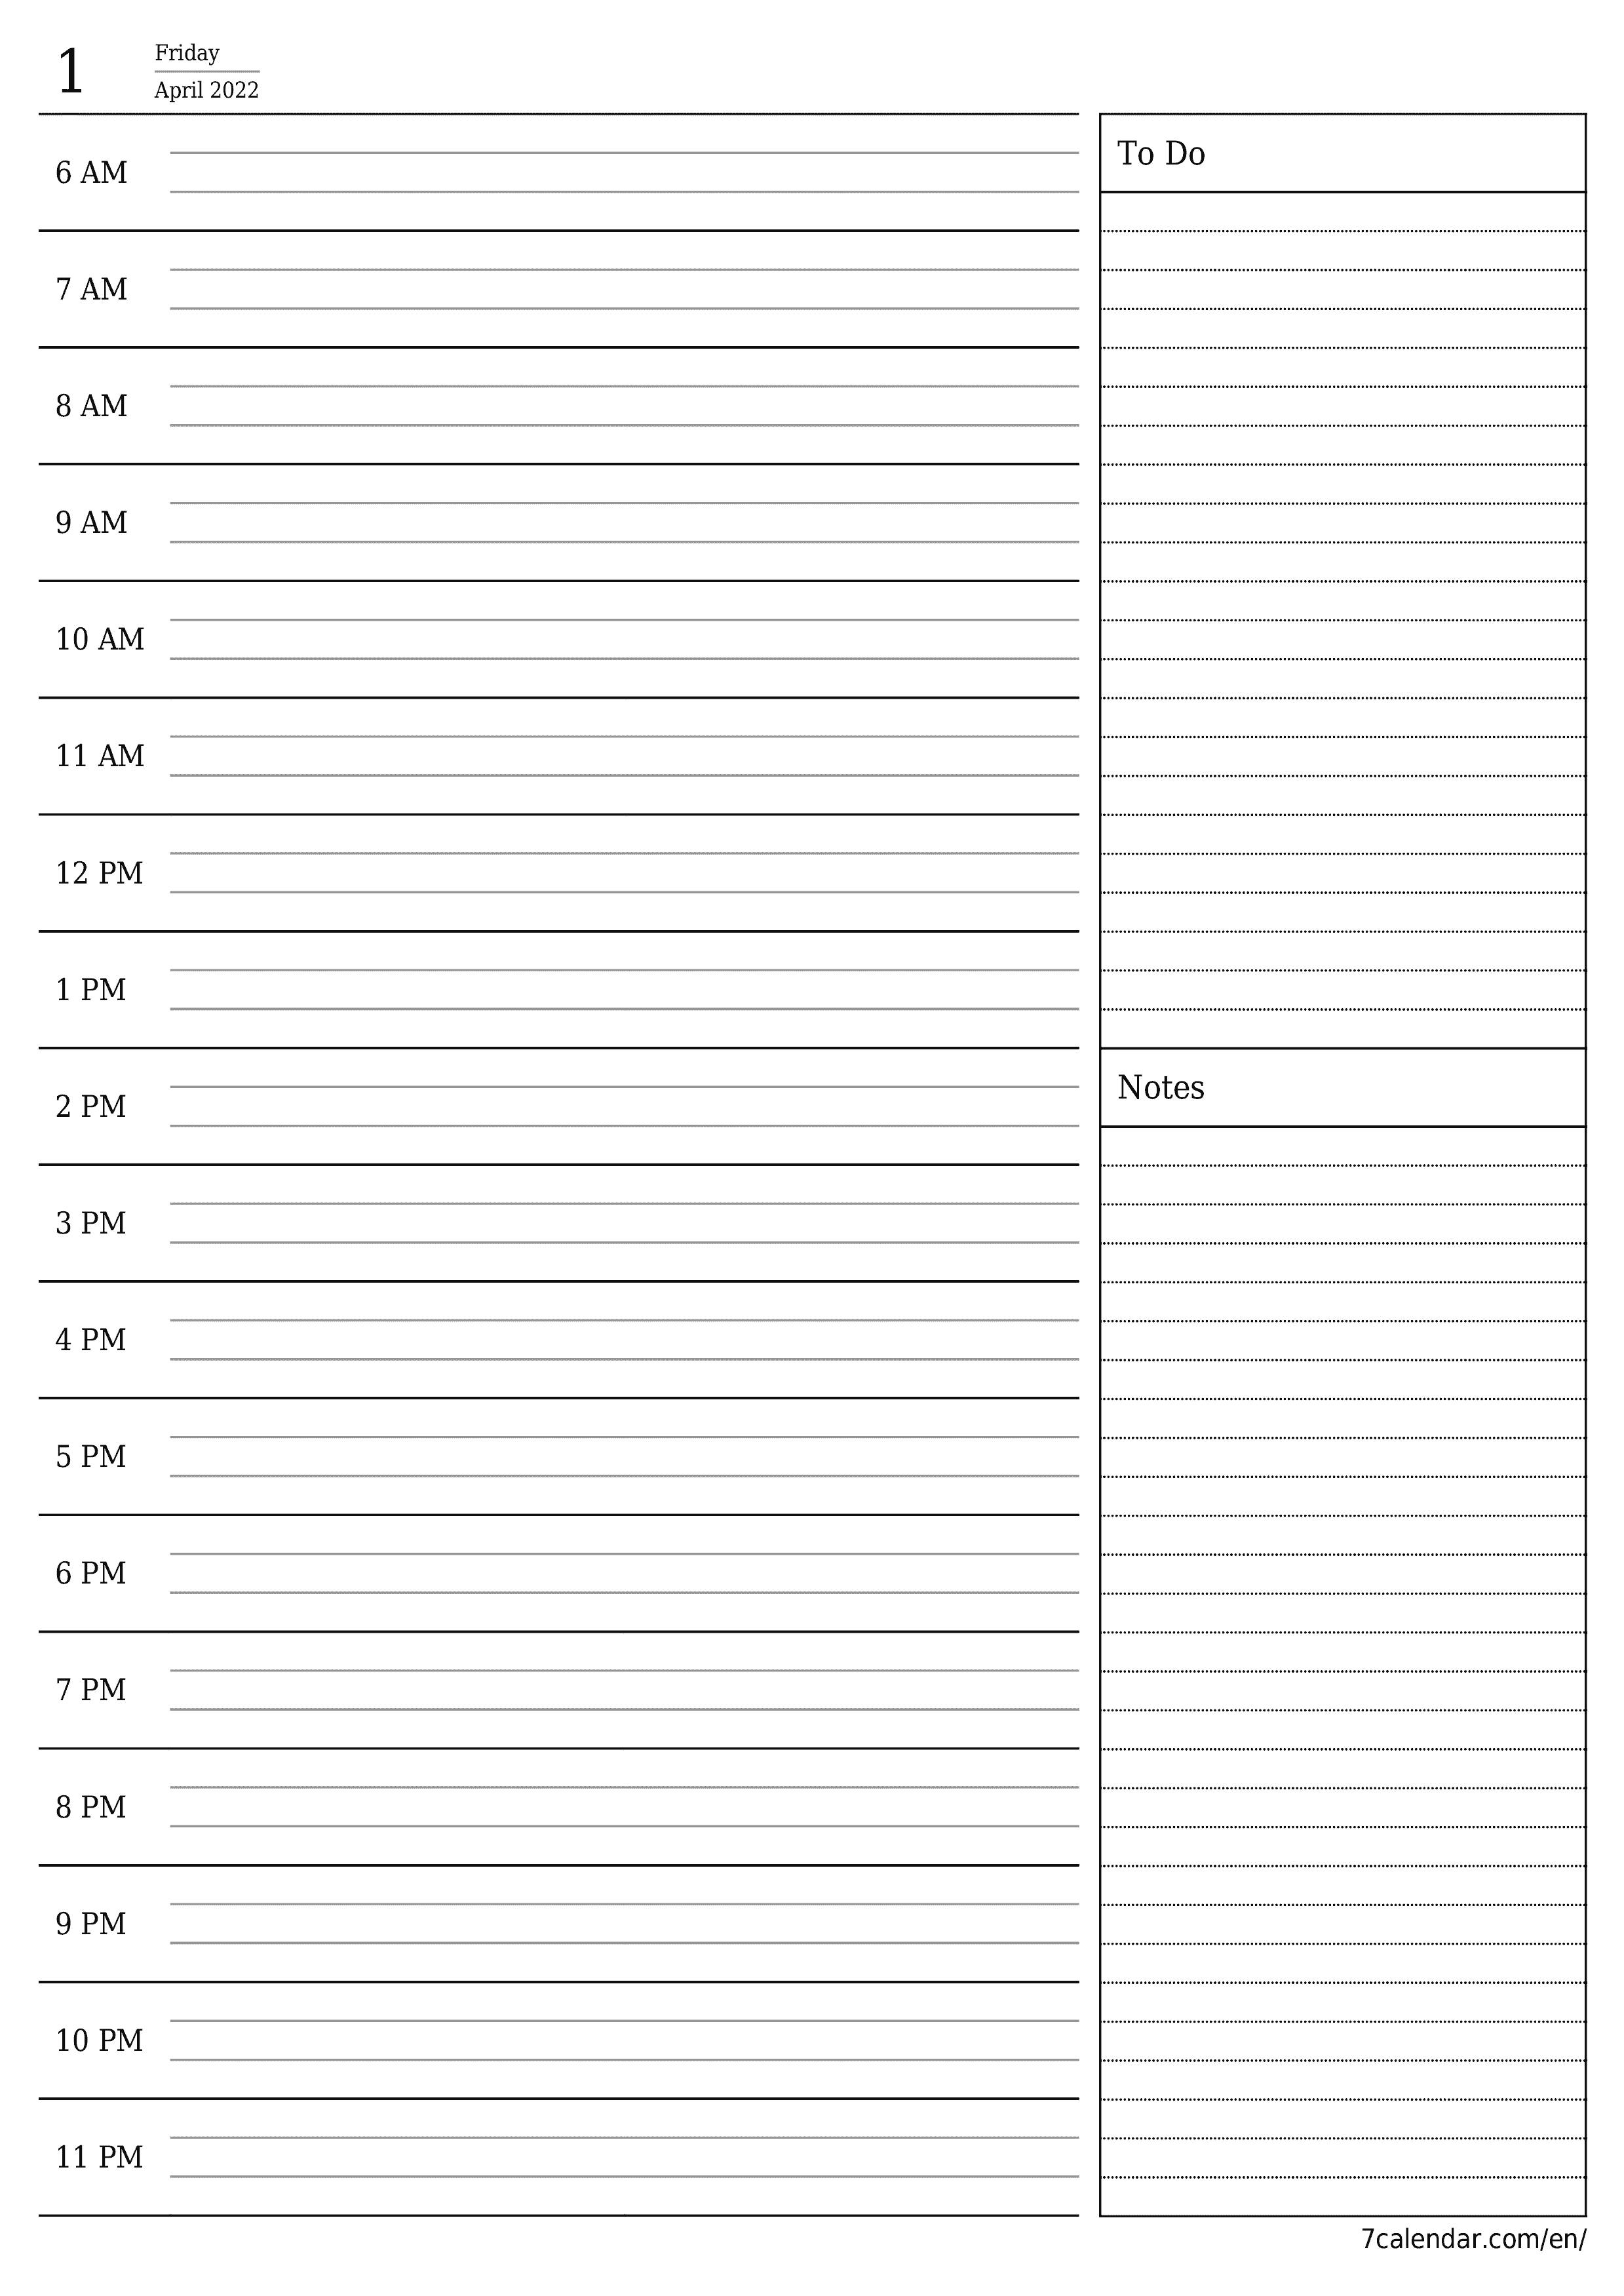 Blank daily printable calendar and planner for day April 2022 with notes, save and print to PDF PNG English - 7calendar.com